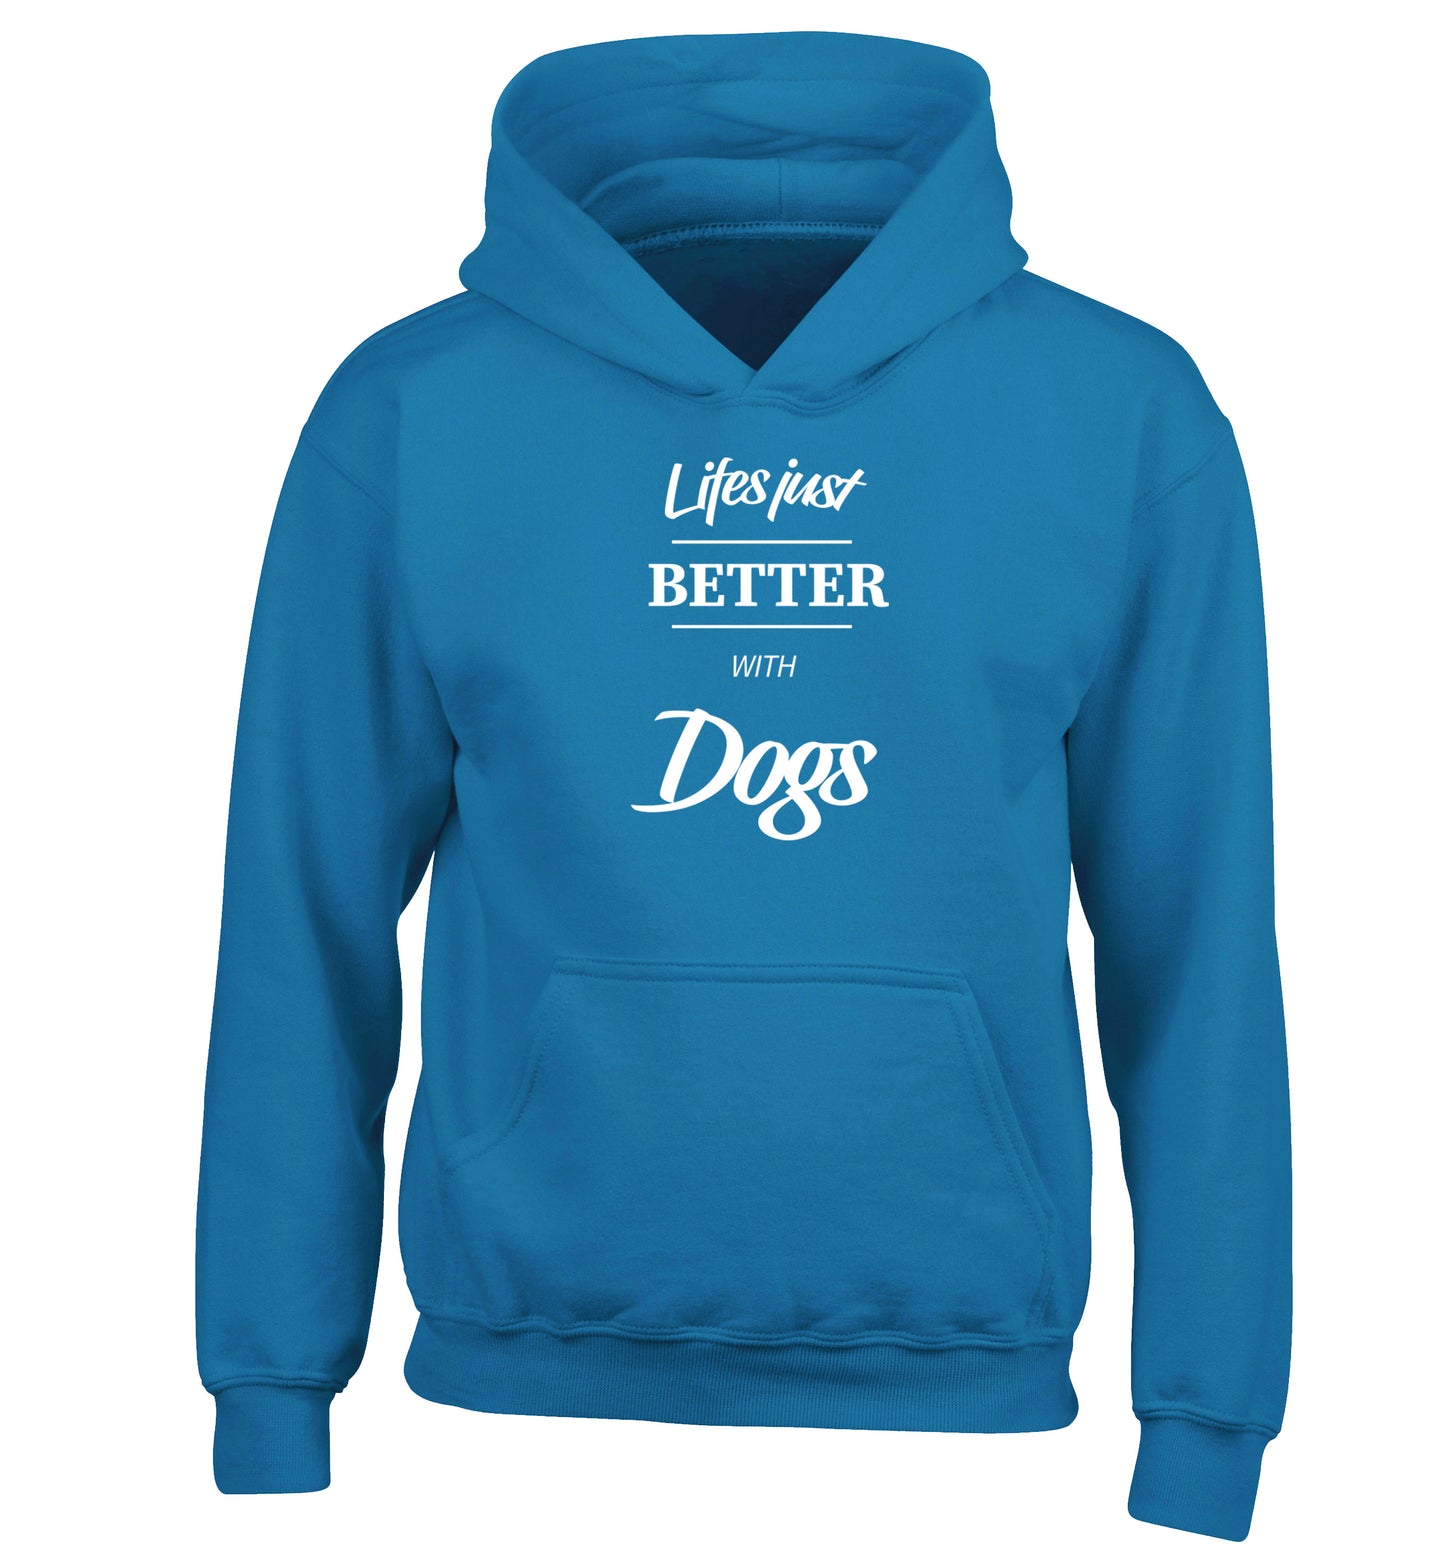 life is better with dogs children's blue hoodie 12-13 Years